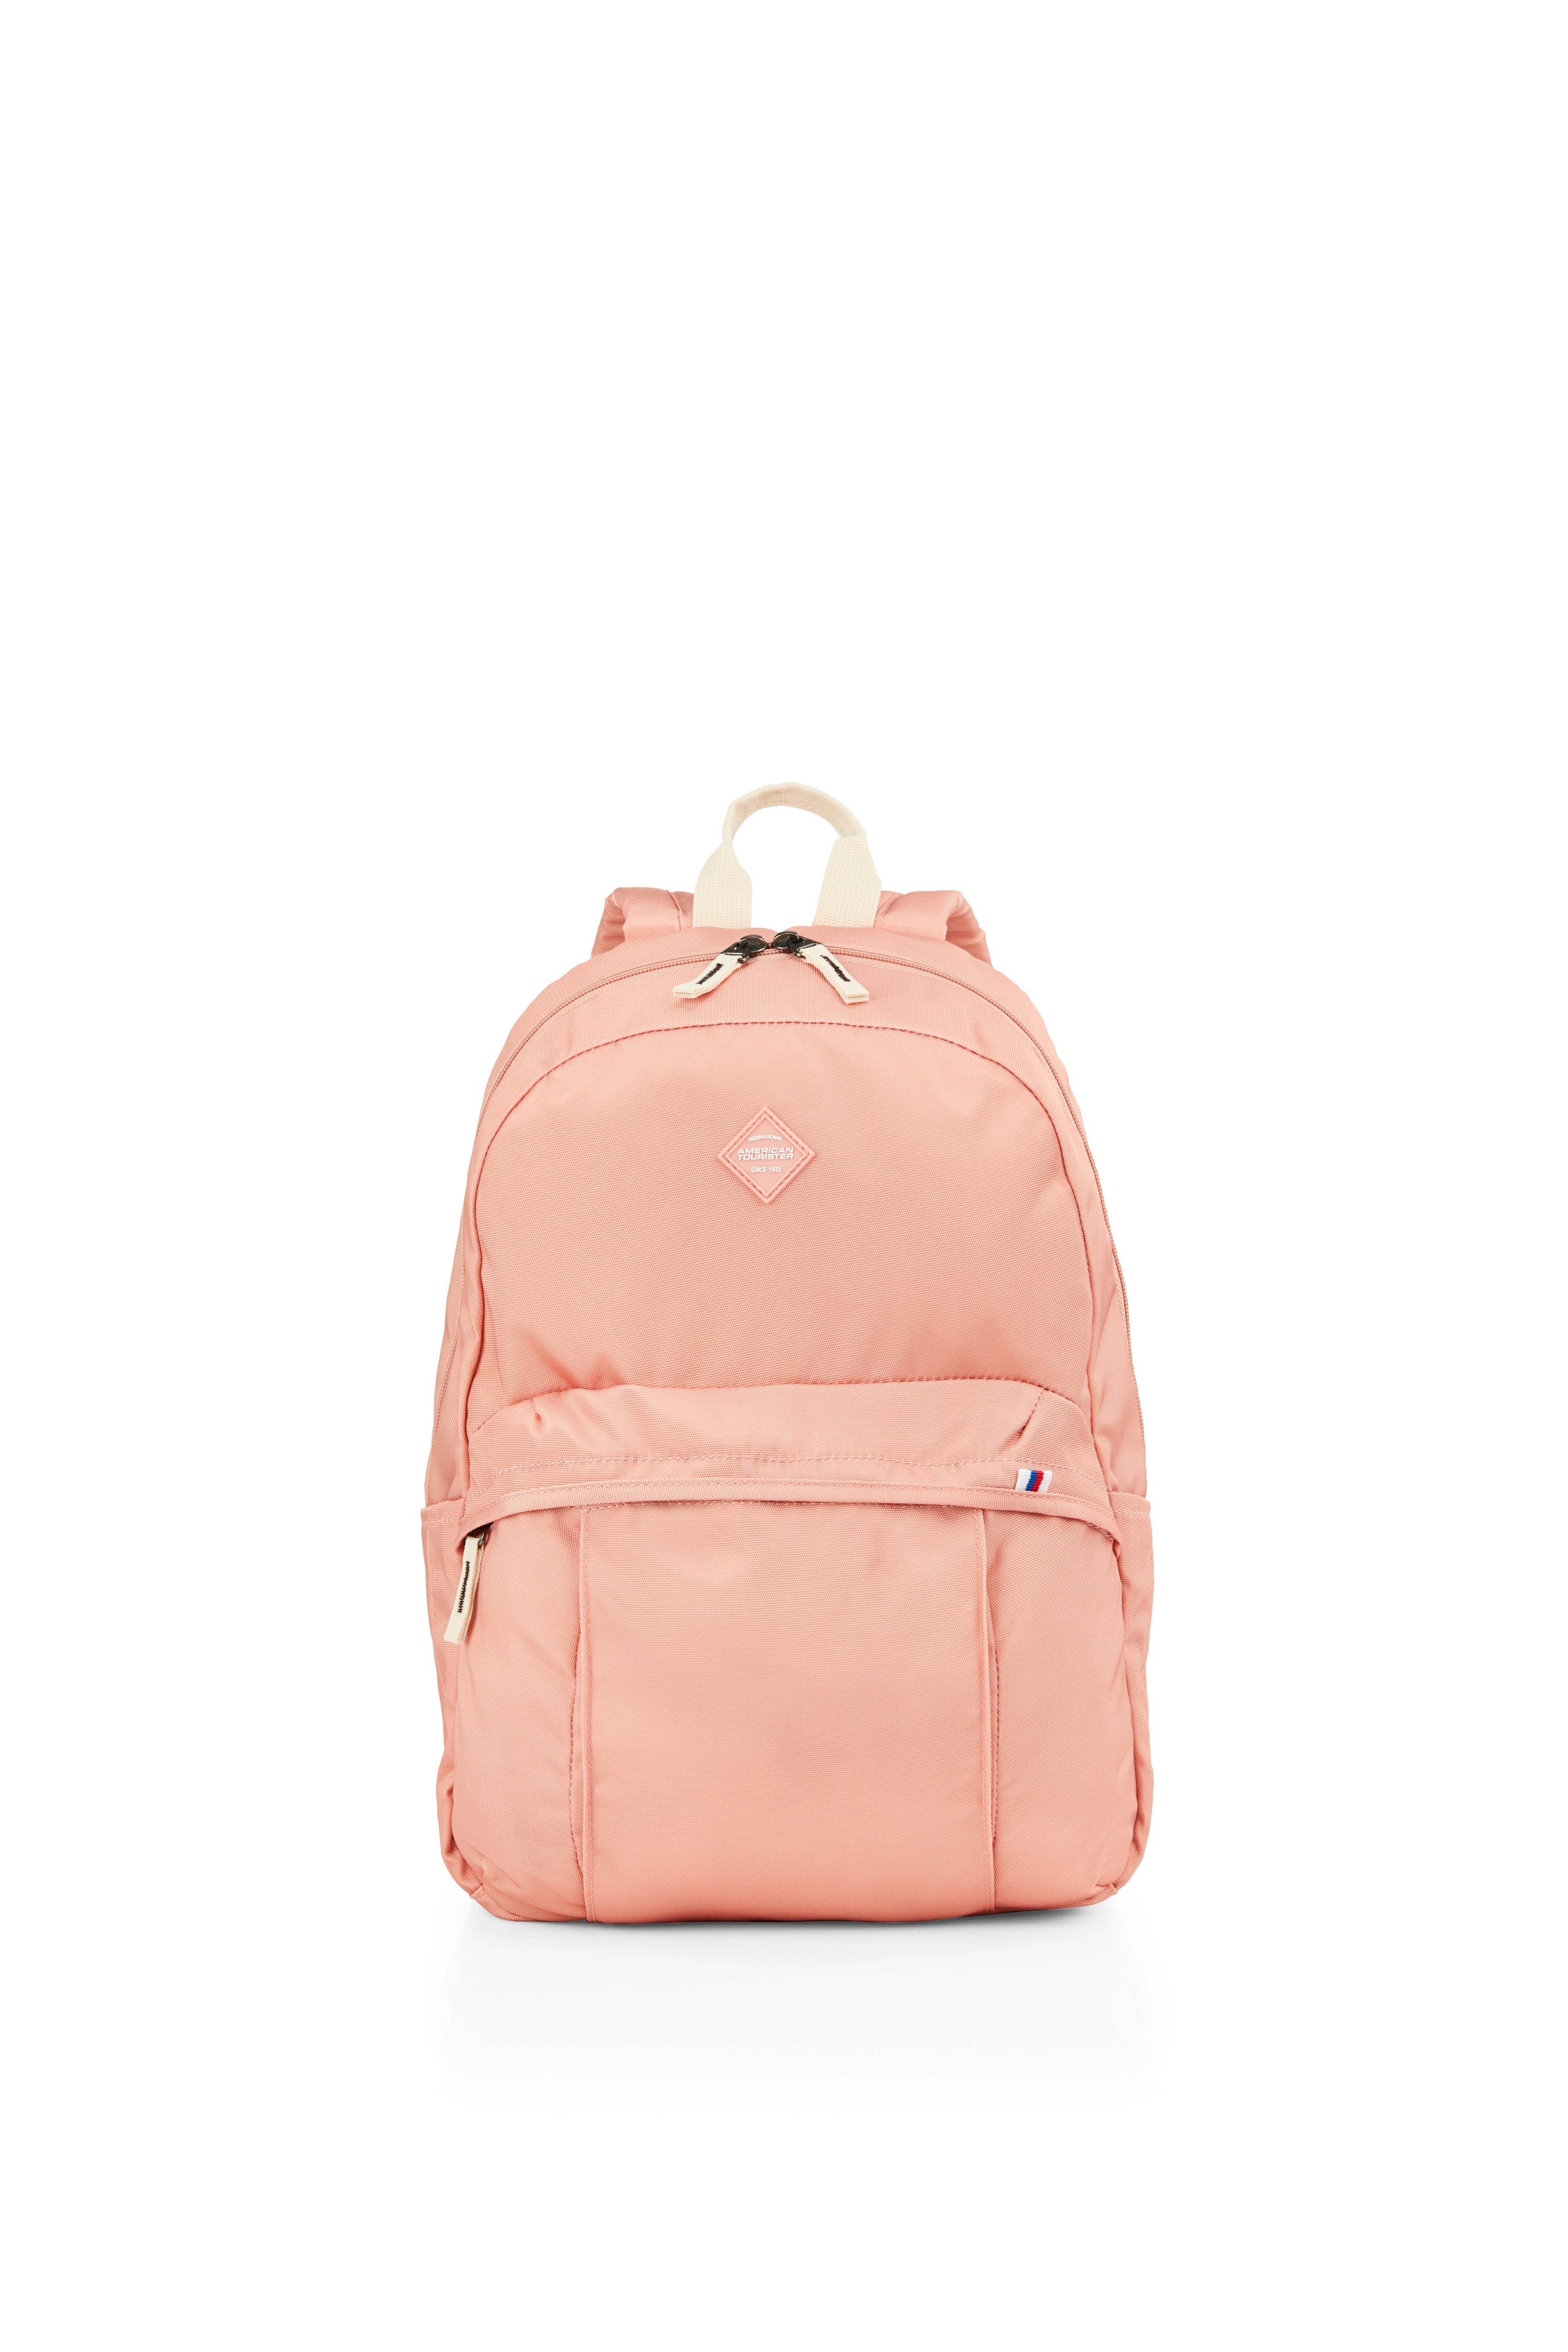 American Tourister - RUDY Small Fashion Backpack - Apricot Ice-2